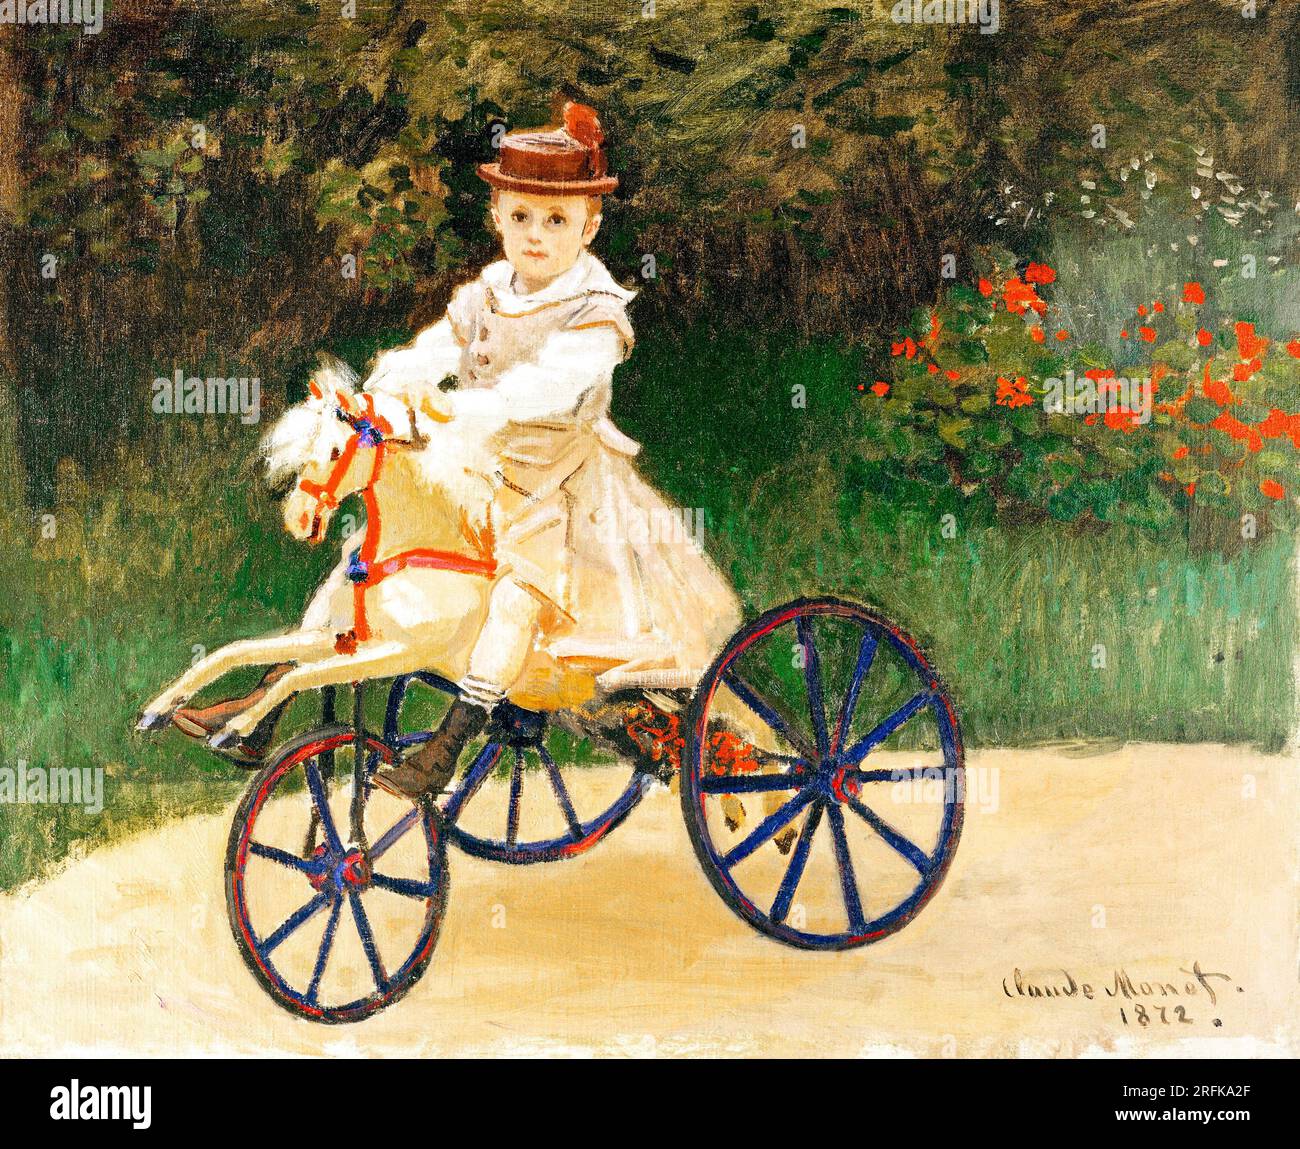 Jean Monet on His Hobby Horse  by Claude Monet, high resolution famous painting. Original from The MET. Stock Photo